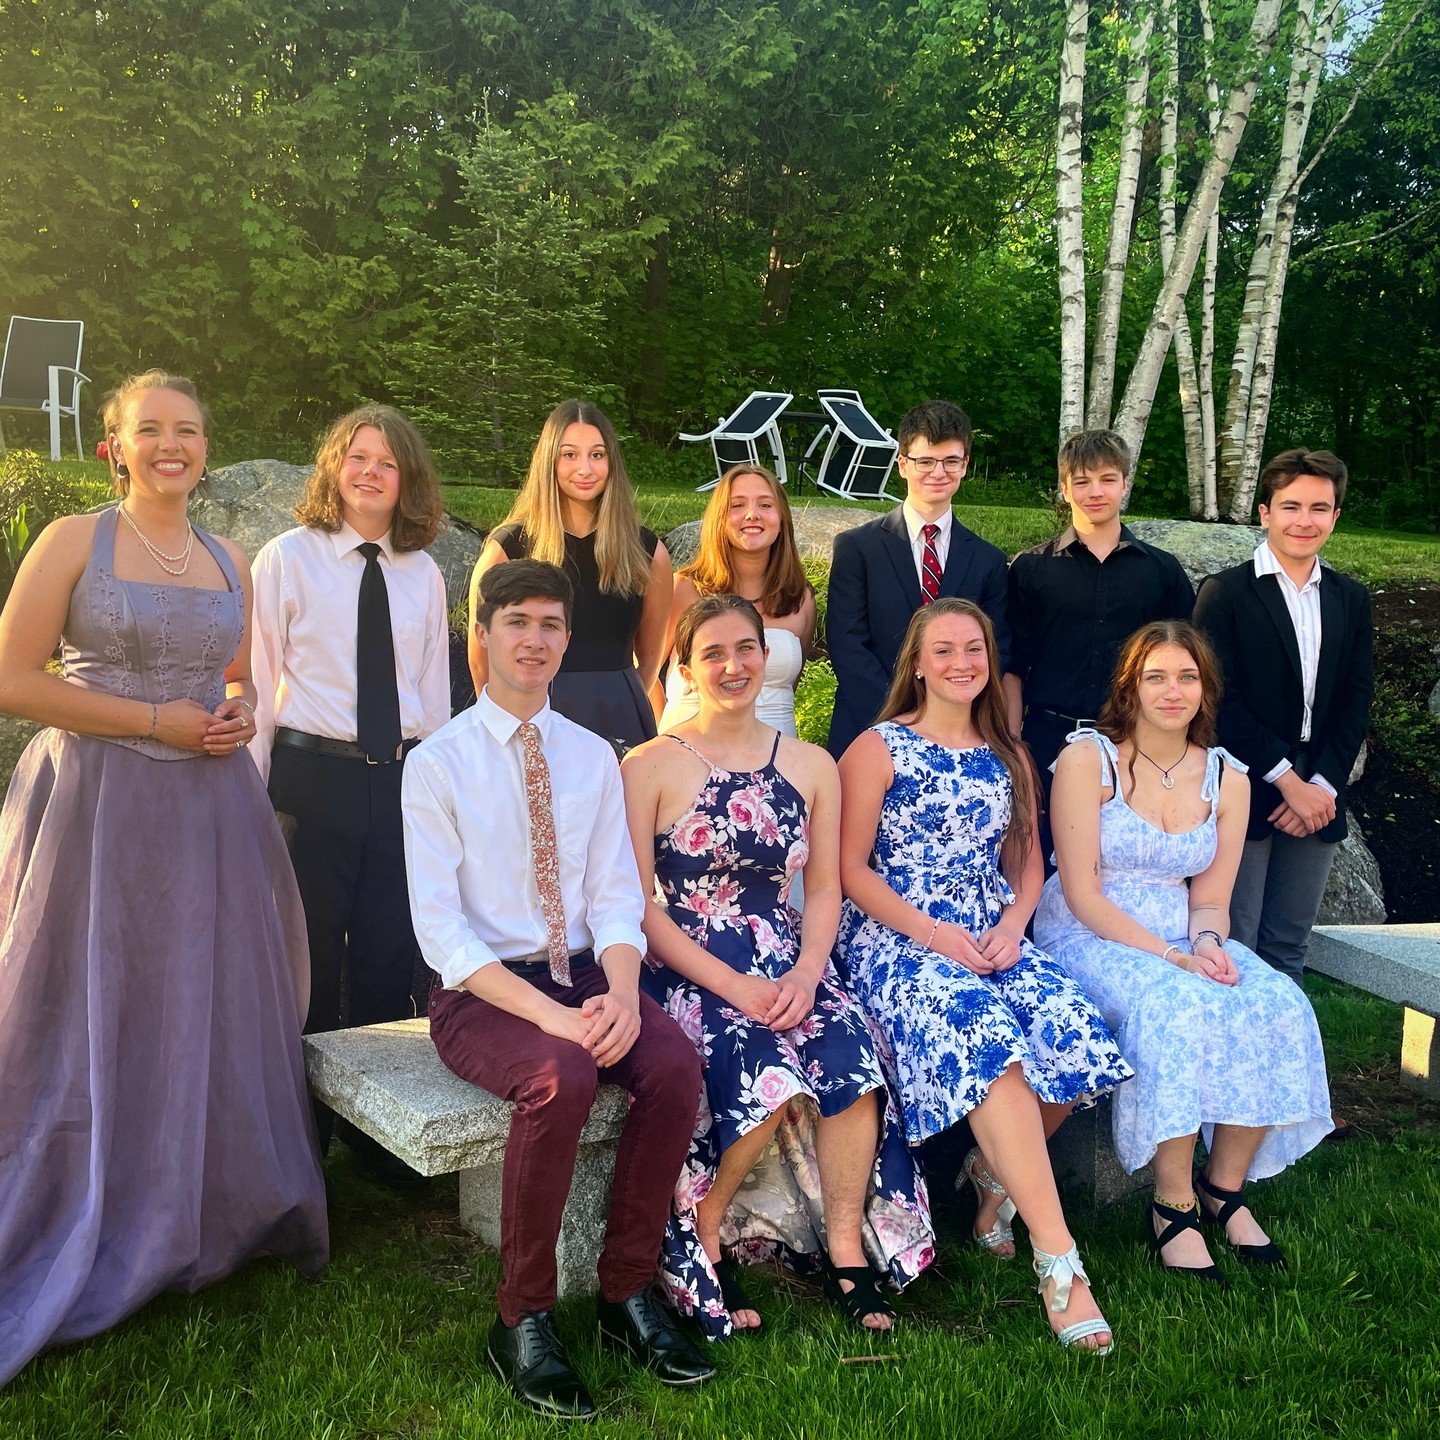 Congratulations to our Young Stars of Maine prizewinners for a gorgeous performance last night. We are so proud of you!